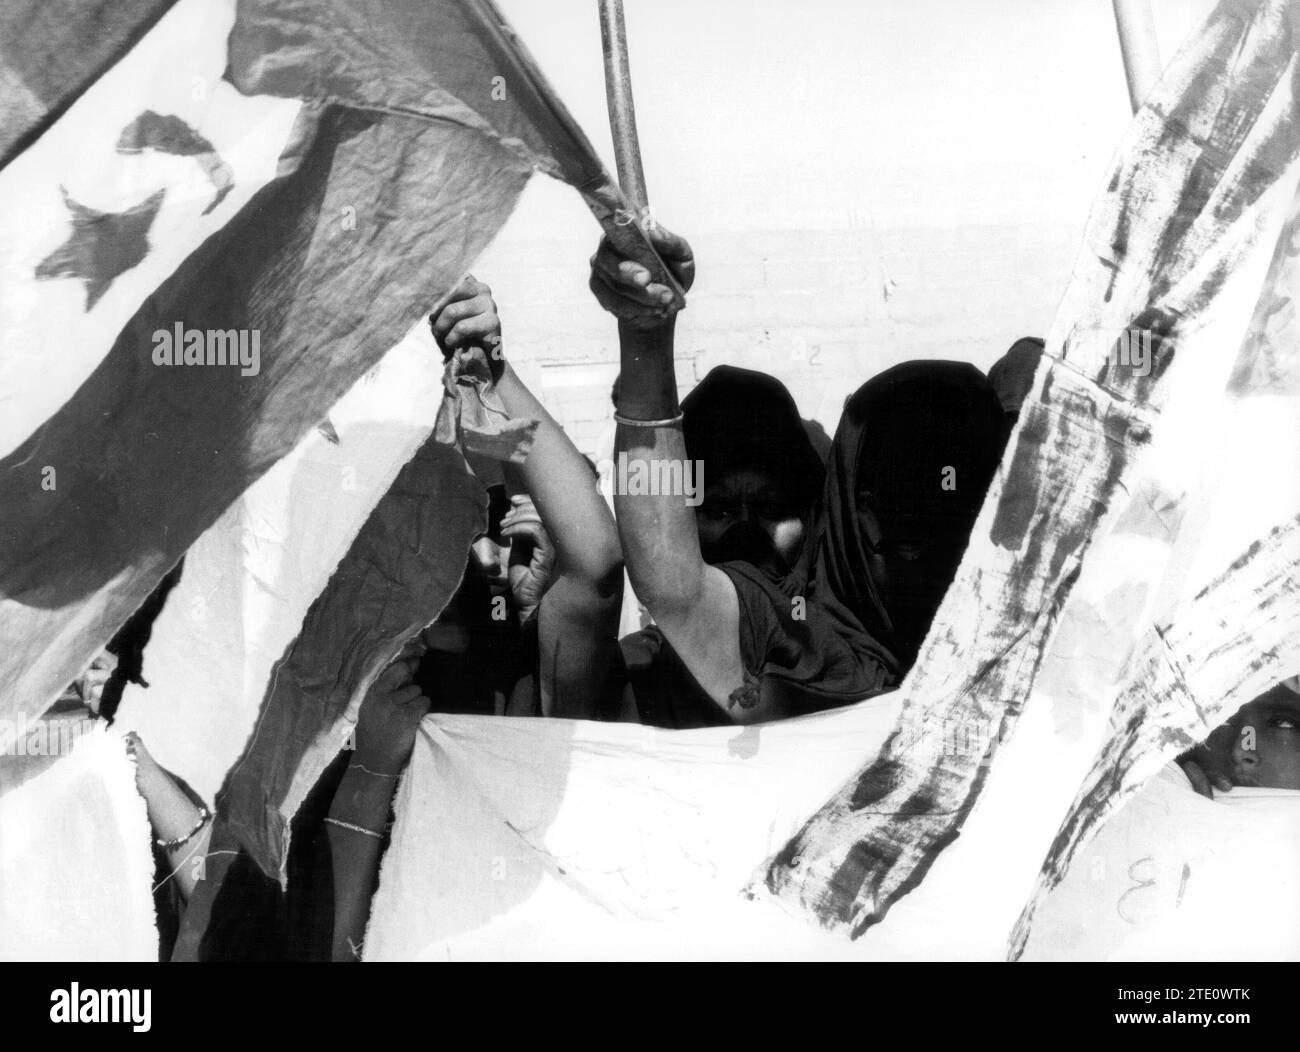 08/17/1975. Demonstration of the Polisario Front Hooded People Carrying their Flags in Aaiun. Credit: Album / Archivo ABC Stock Photo